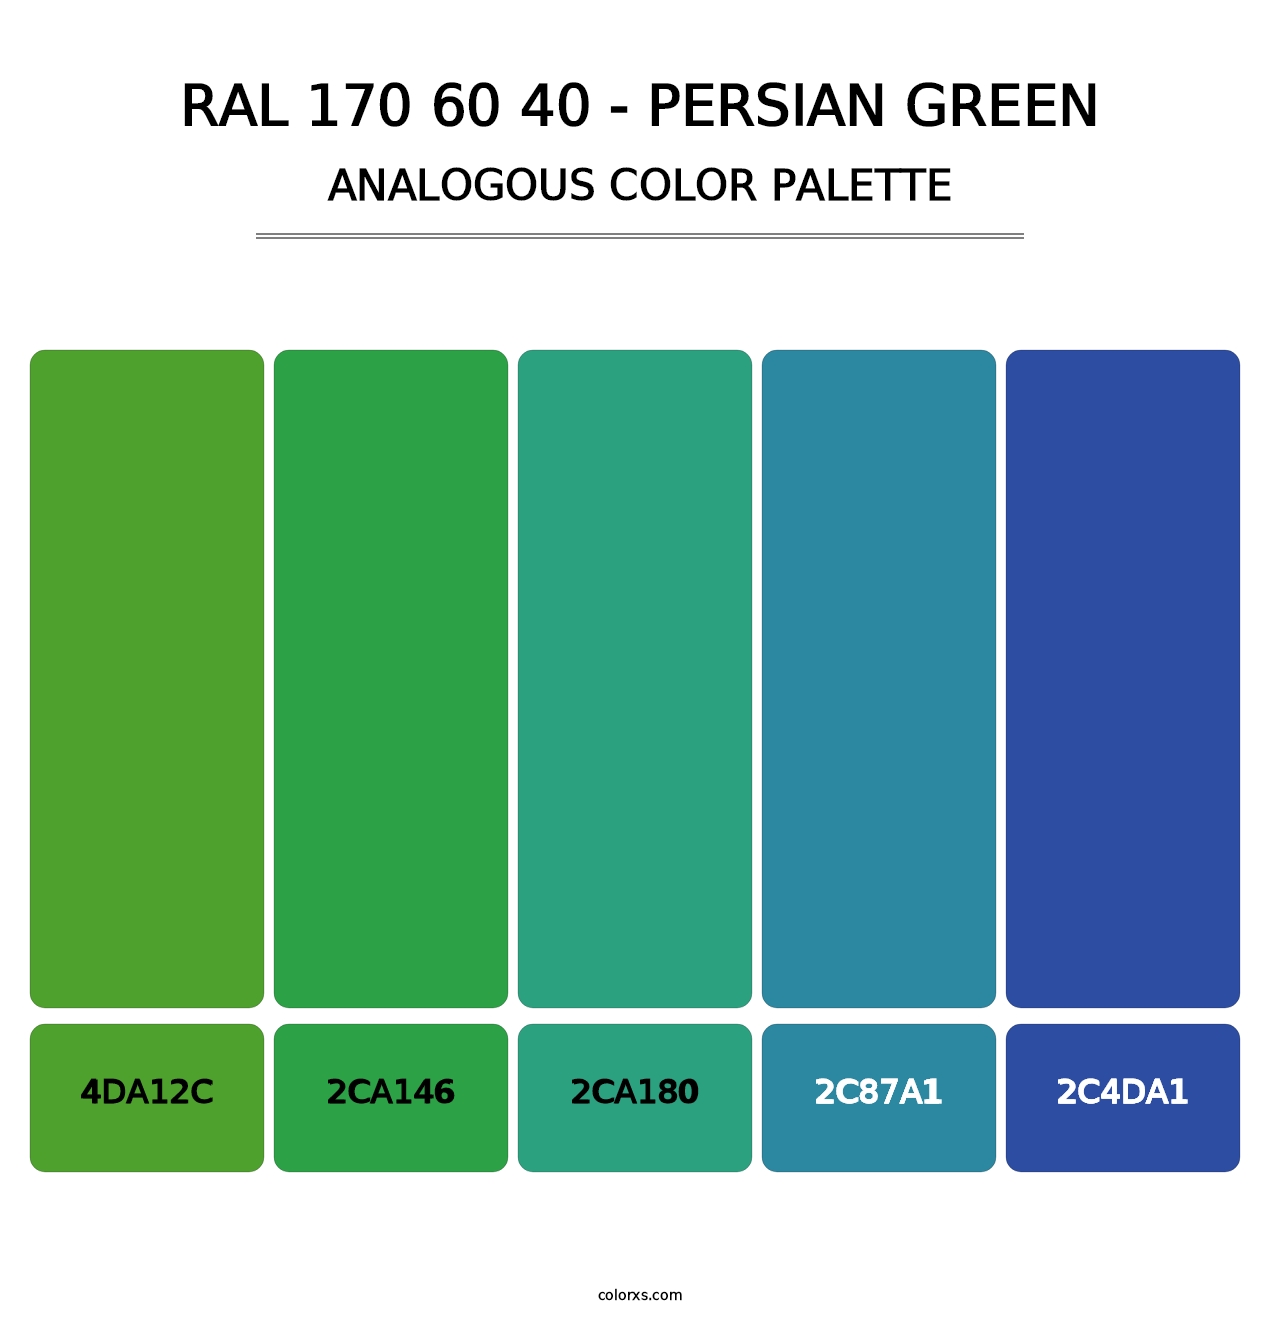 RAL 170 60 40 - Persian Green - Analogous Color Palette